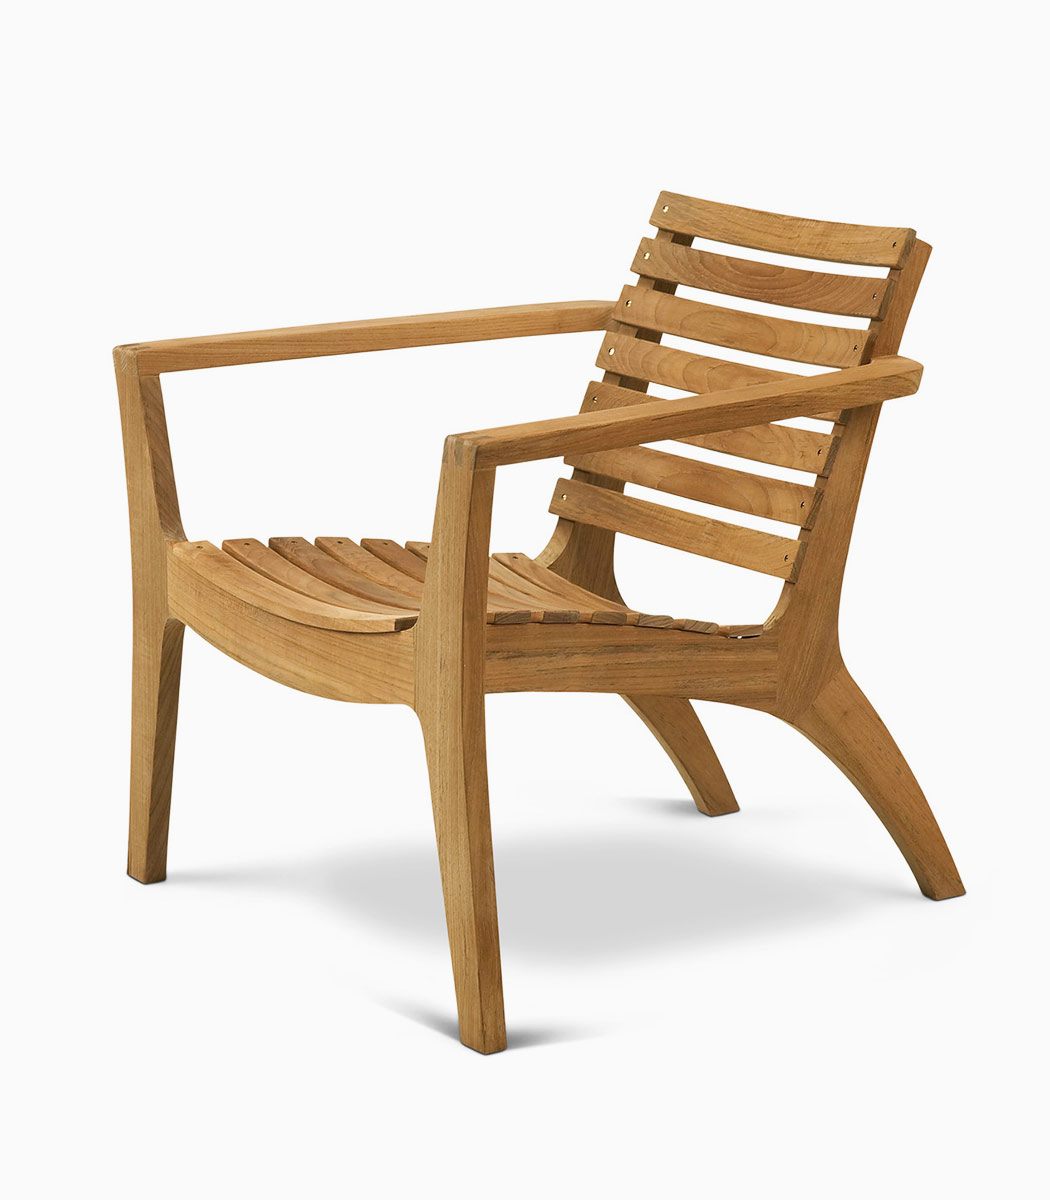 Classic wooden chair 3